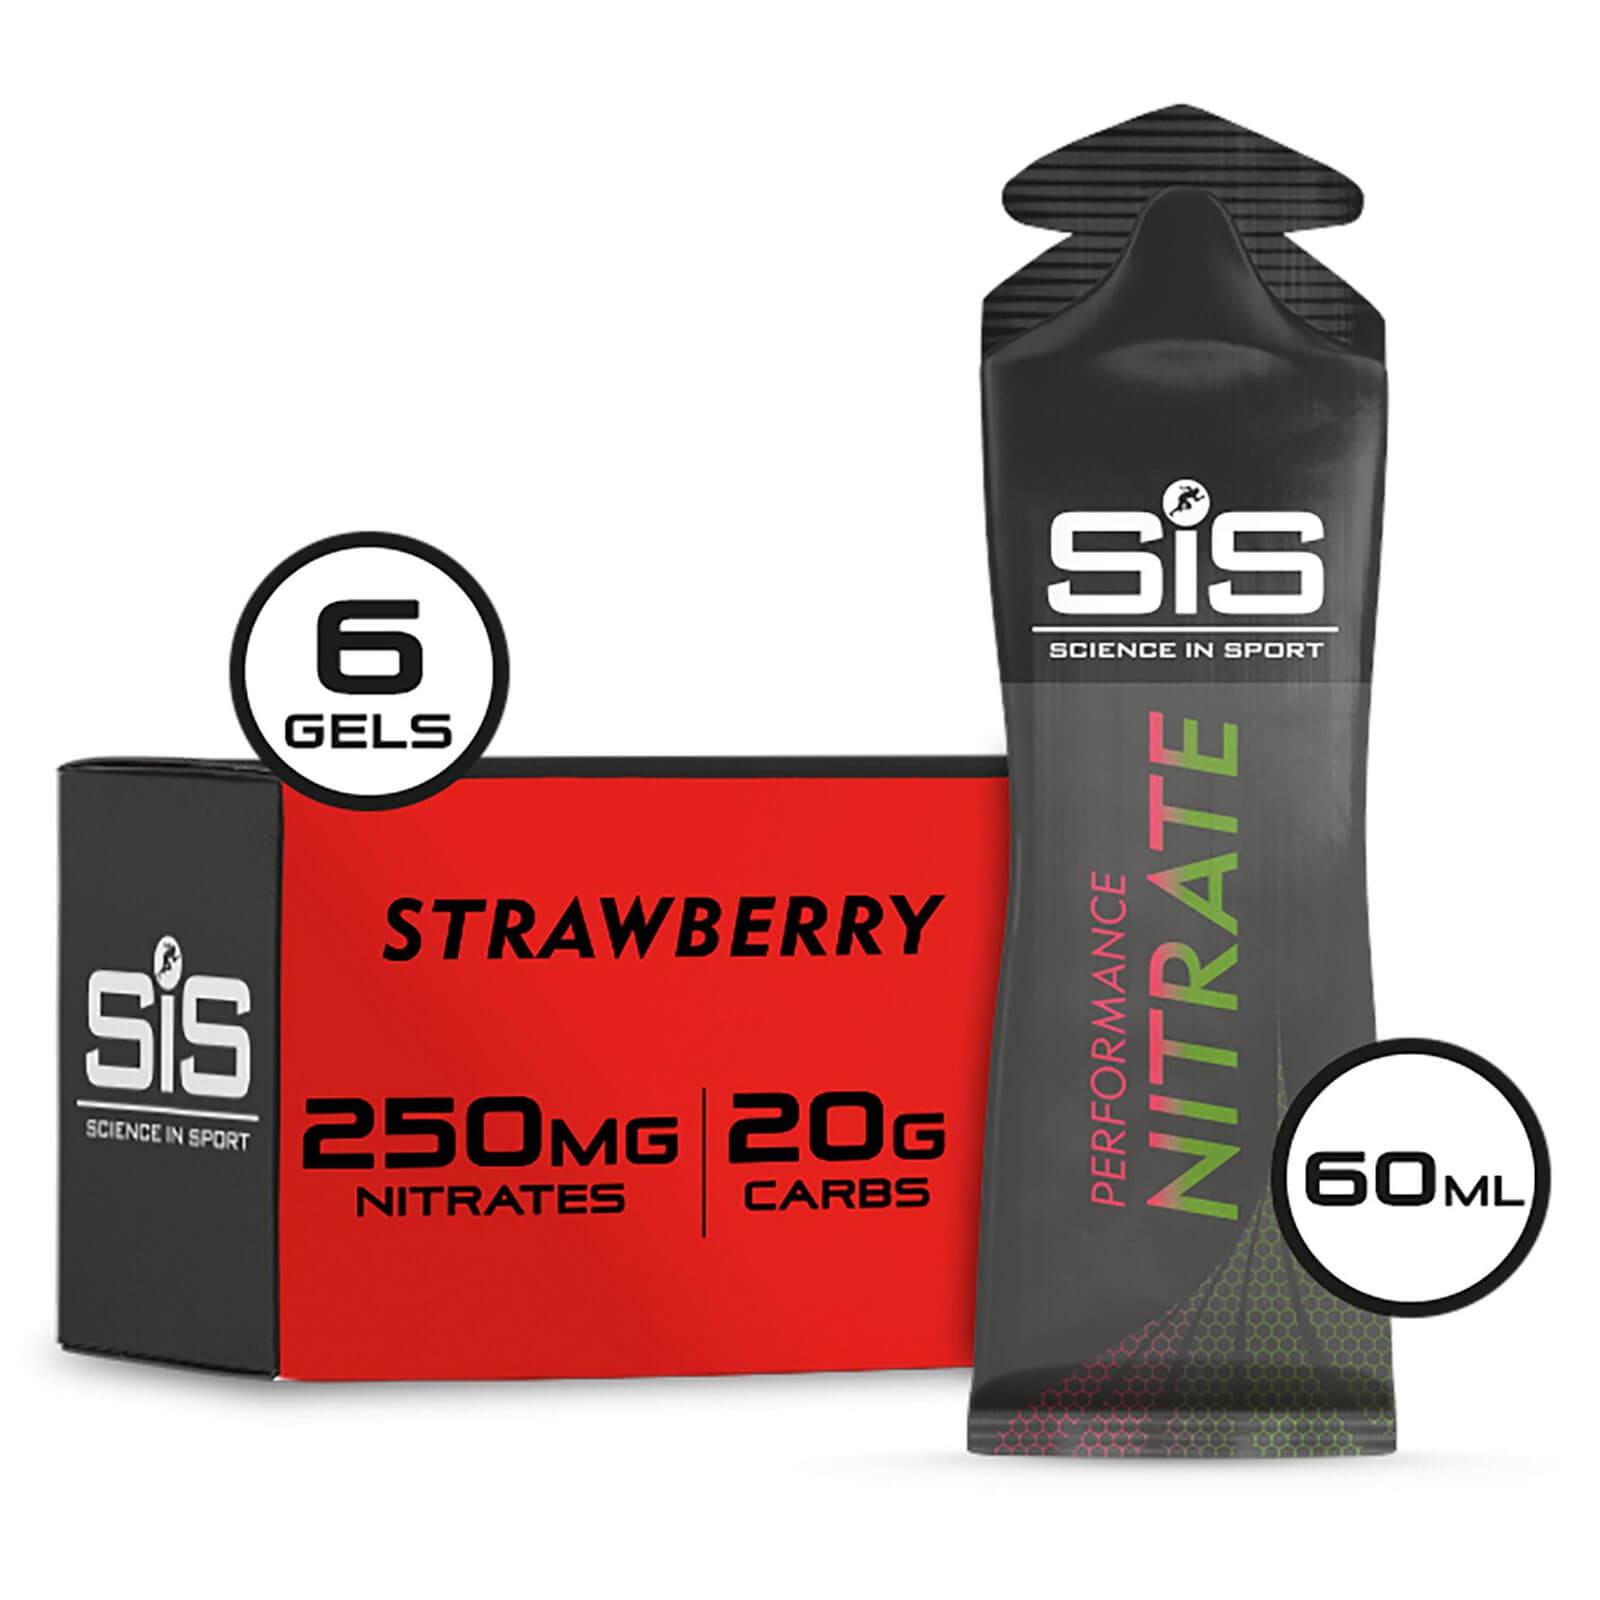 Science in Sport Performance Nitrate 60ml Gel Box of 6 - Strawberry